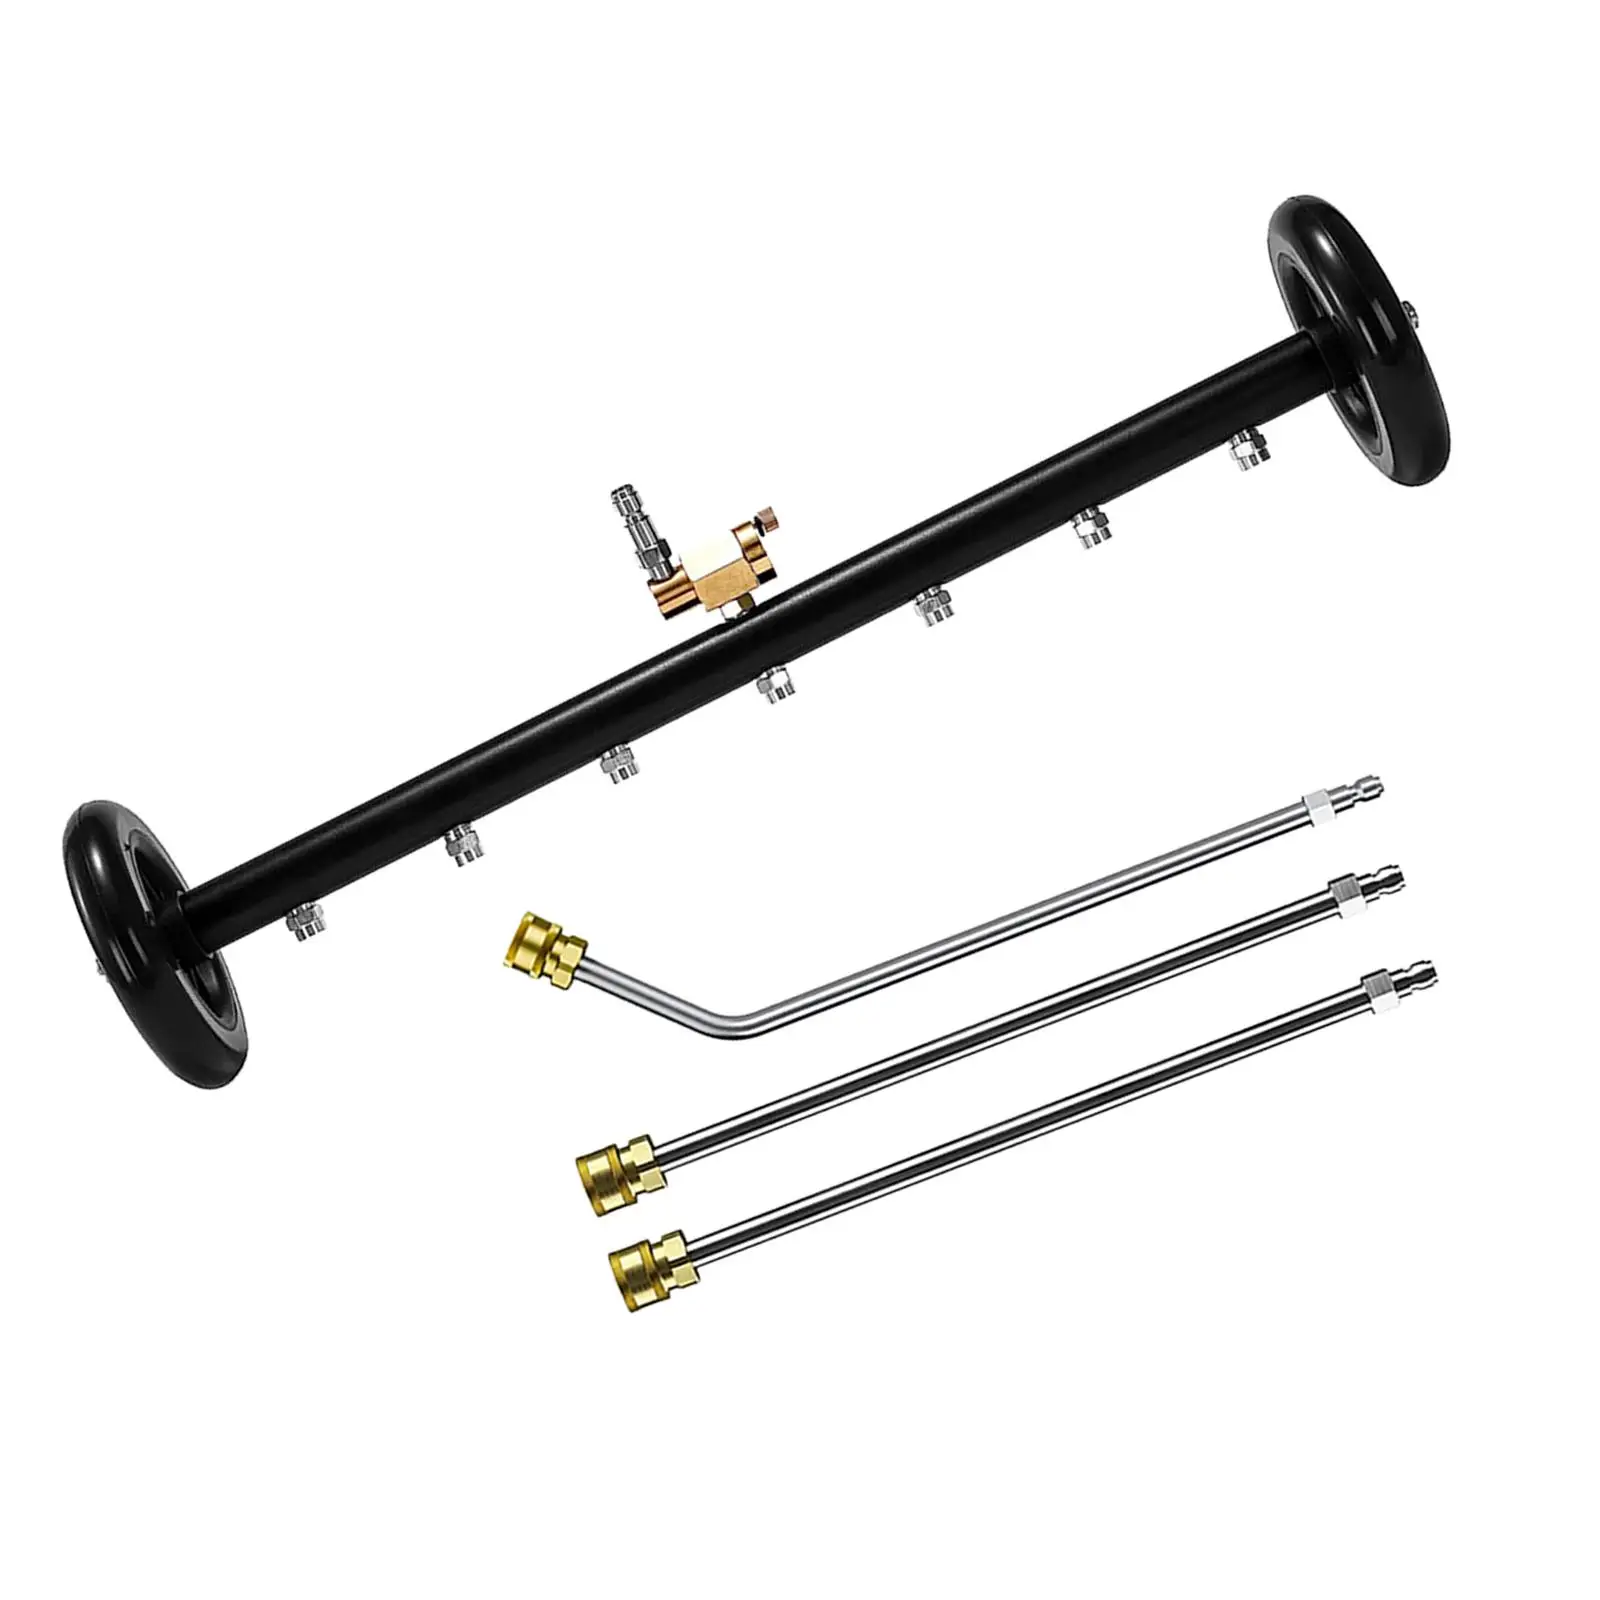 Undercarriage Cleaner Water Broom with 16 inch Extension Rod and 45 Angled Rod 24in Surface Cleaner Attachment for SUV RV Truck